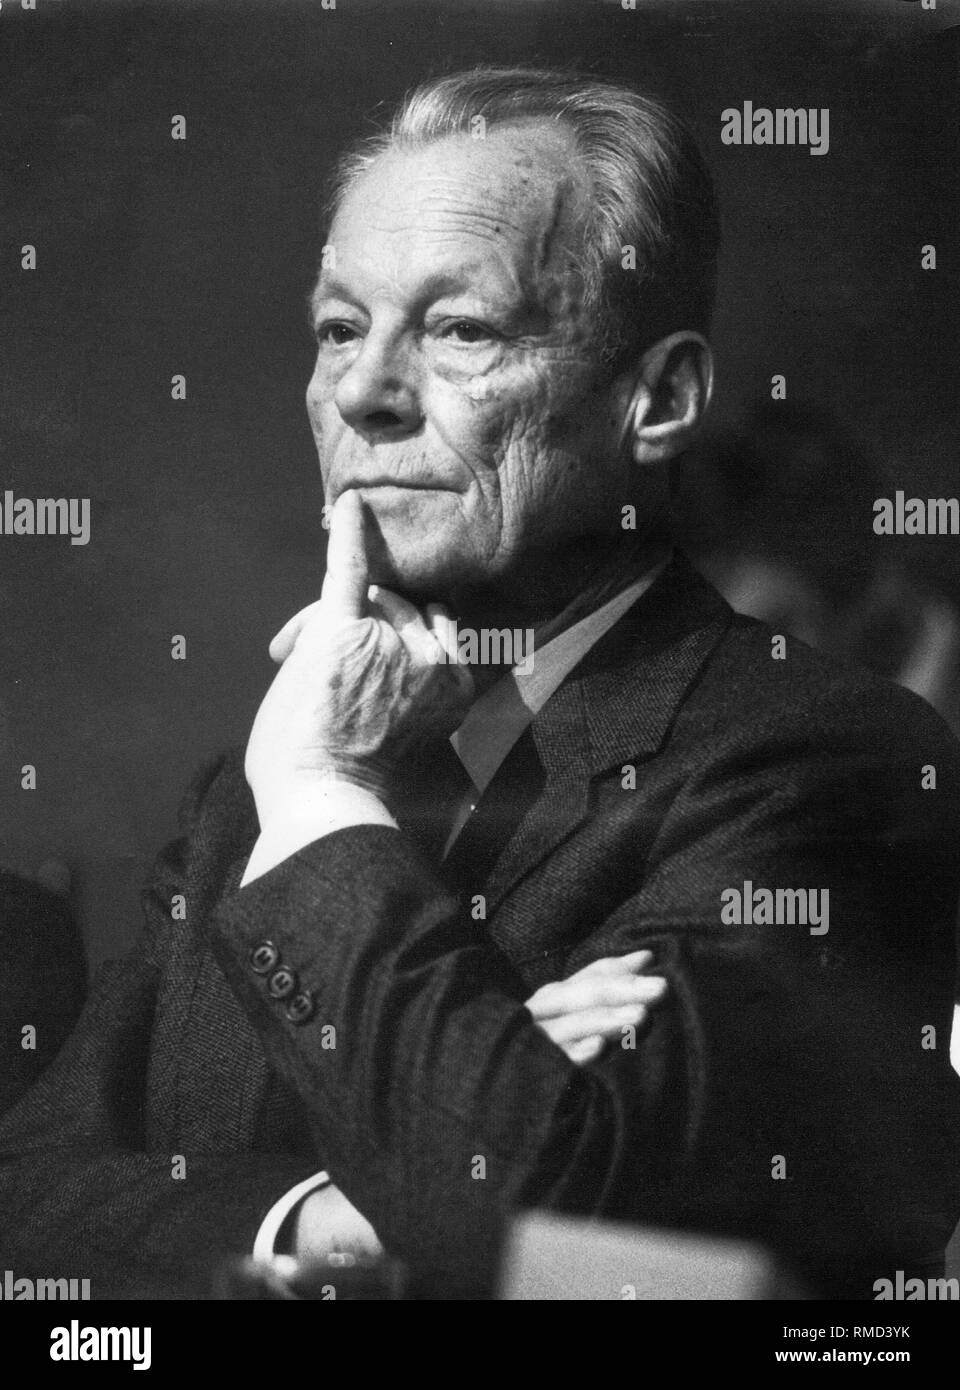 The SPD chairman Willy Brandt at the SPD party congress in Cologne. Stock Photo